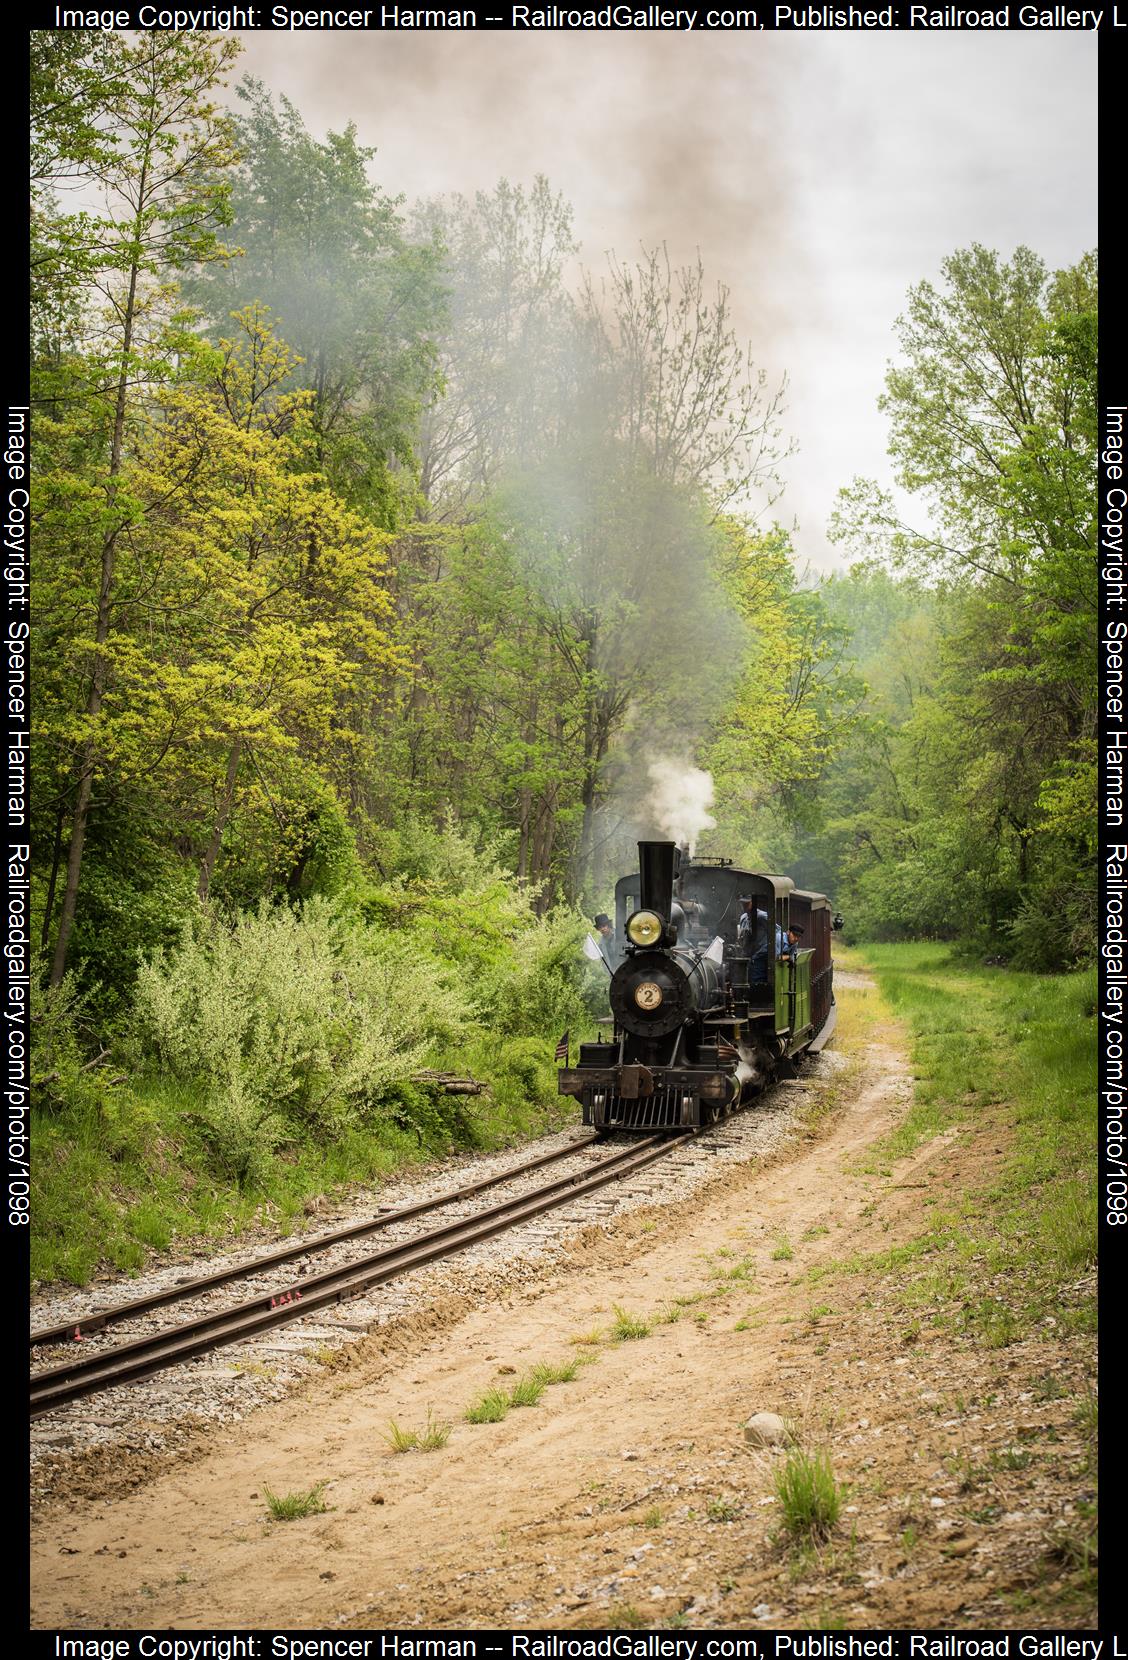 Porter #2 is a class 2-6-0 and  is pictured in LaPorte, Indiana, USA.  This was taken along the Narrow Gauge Line on the Hesston Steam Museum. Photo Copyright: Spencer Harman uploaded to Railroad Gallery on 05/27/2023. This photograph of Porter #2 was taken on Saturday, May 13, 2023. All Rights Reserved. 